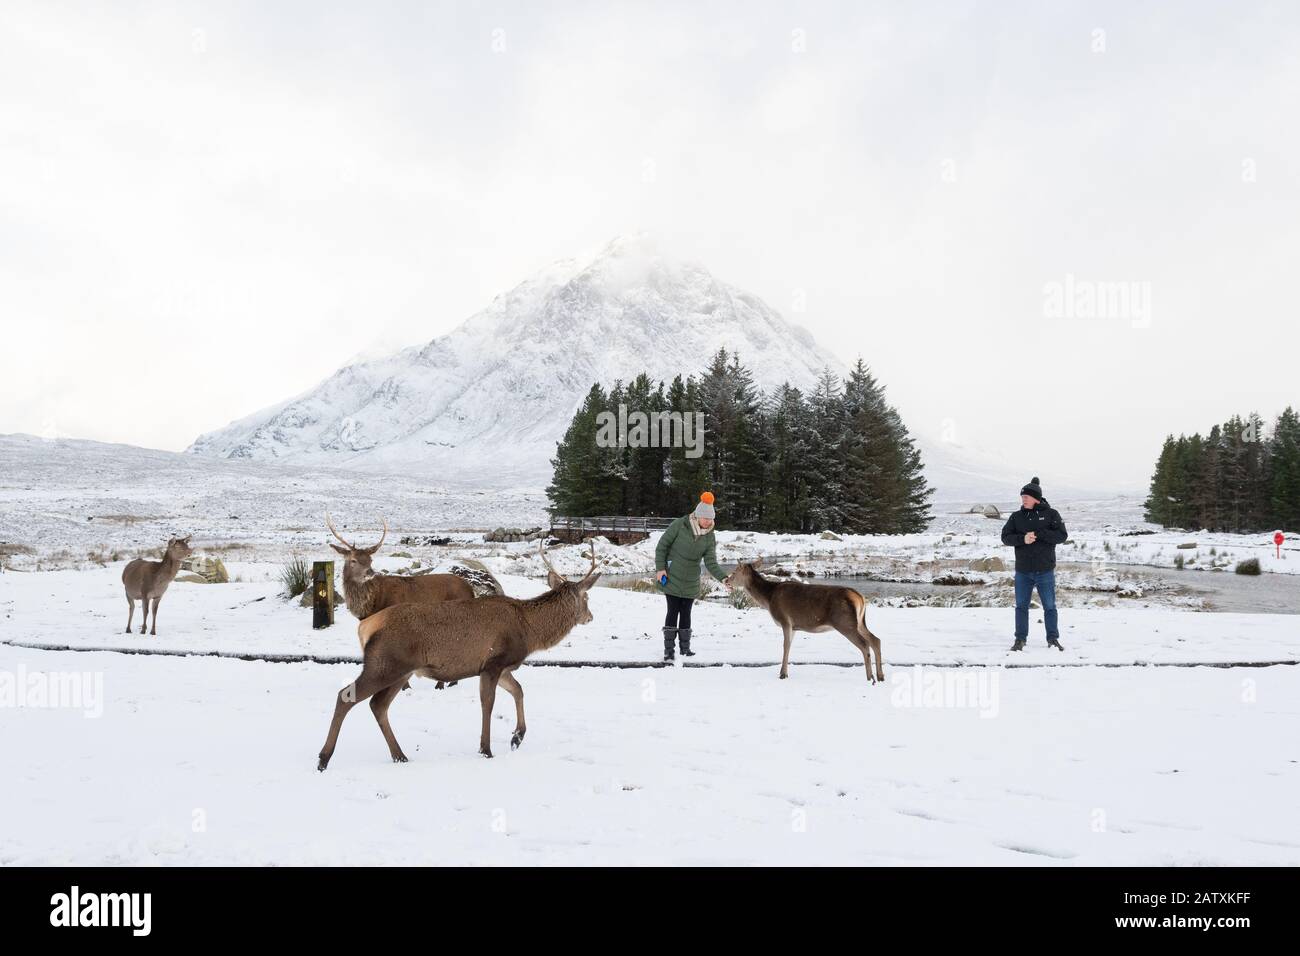 Deer in Glen Coe outside the Kingshouse Hotel being fed by tourists in the snow with the iconic Buachaille Etive Mor in the background, Scotland, UK Stock Photo